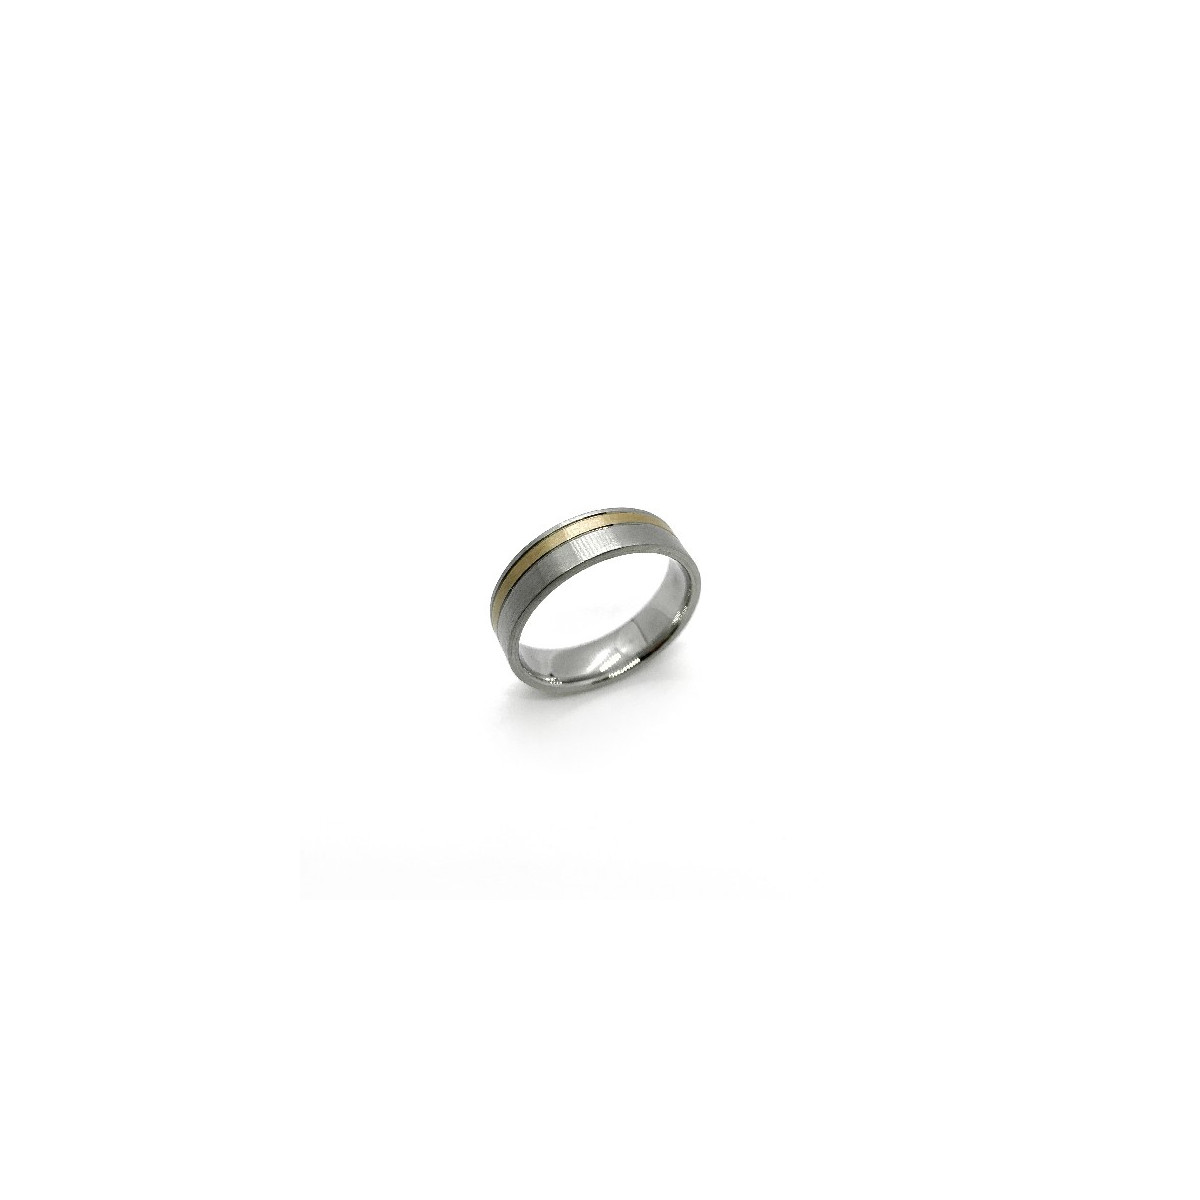 STEEL AND GOLD TENO RING - 068.1300.D30.62